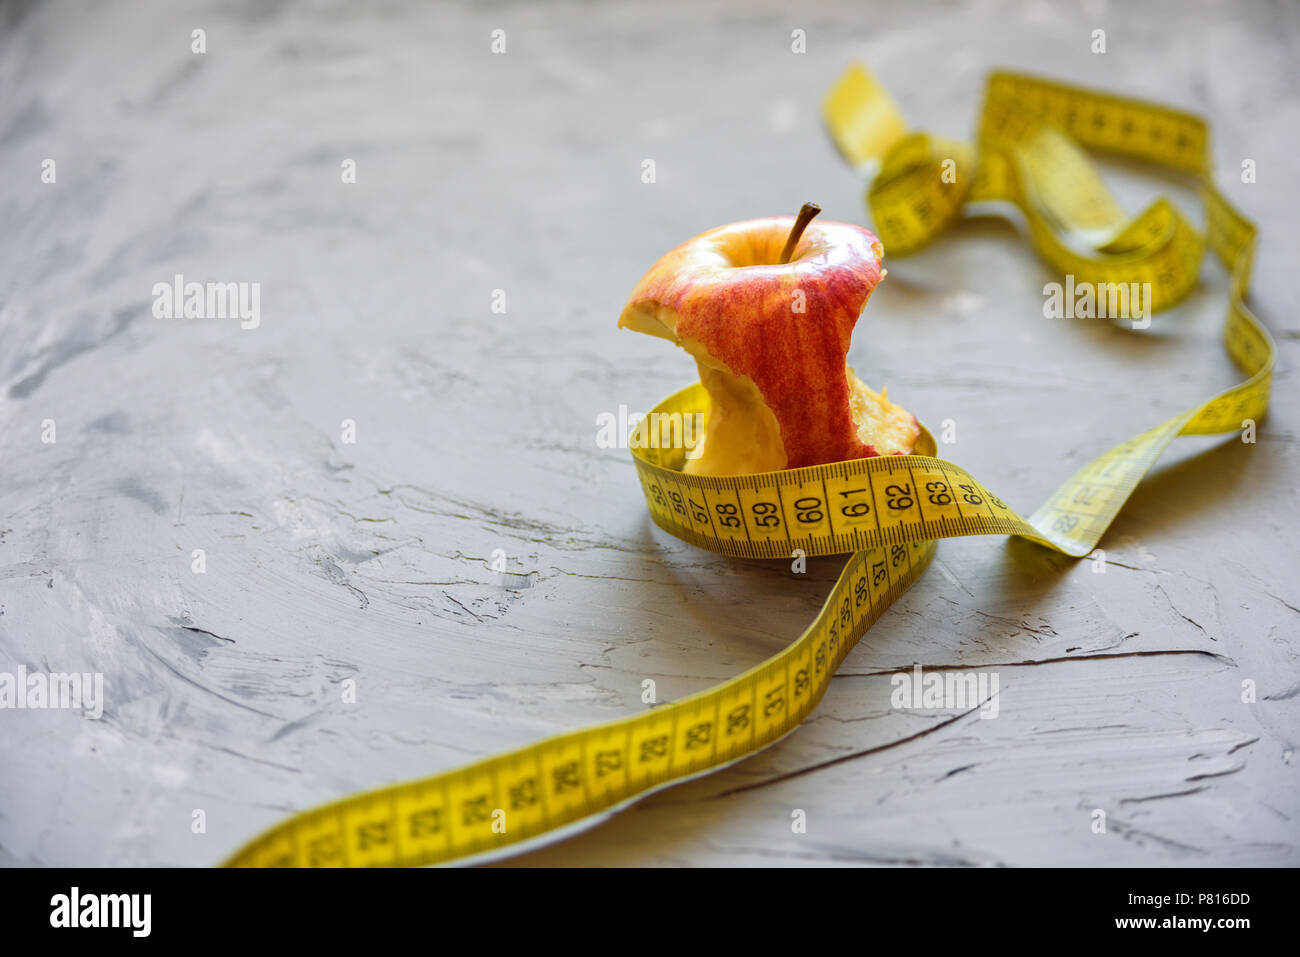 diet, healthy eating, food and weigh loss concept - close up of apple and measuring tape Stock Photo